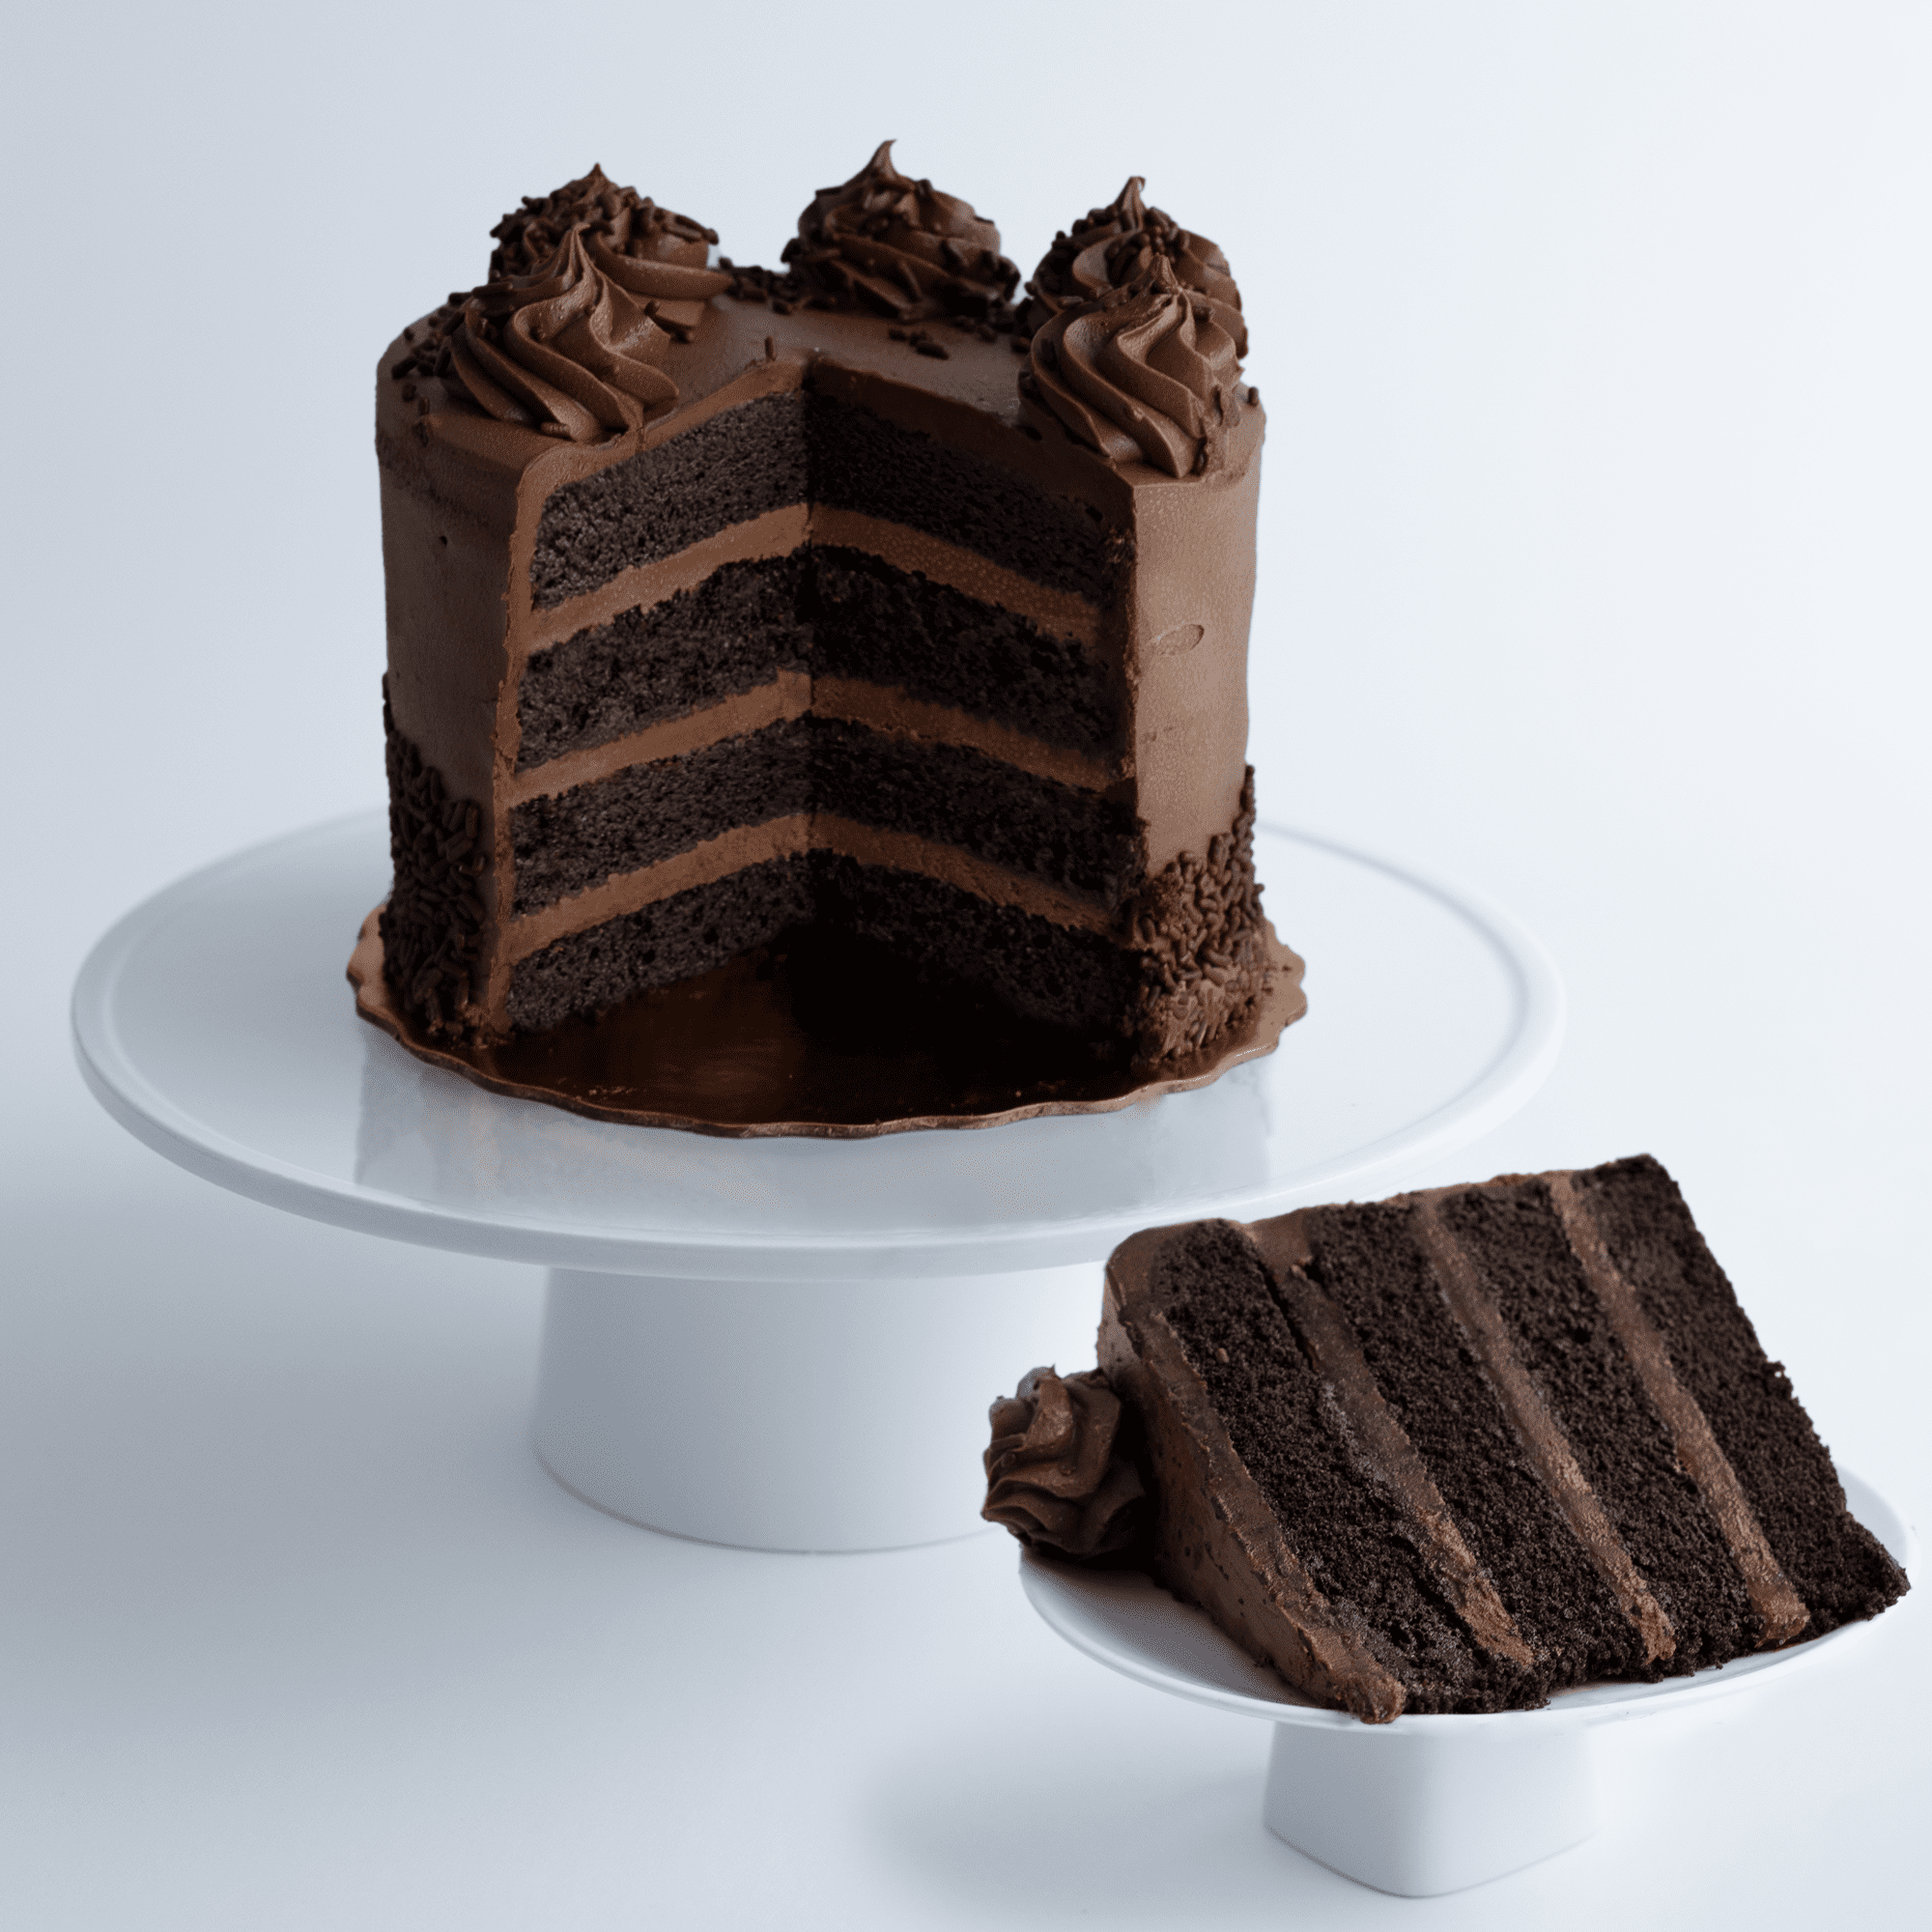 Carlo's Bakery Cake Boss Chocolate Fudge Cake, Small 6” Size - Serves 6 to 8 - Birthday Cakes and Treats for Delivery - Baked Fresh Daily, Delivered Frozen in Dry Ice - Walmart.com